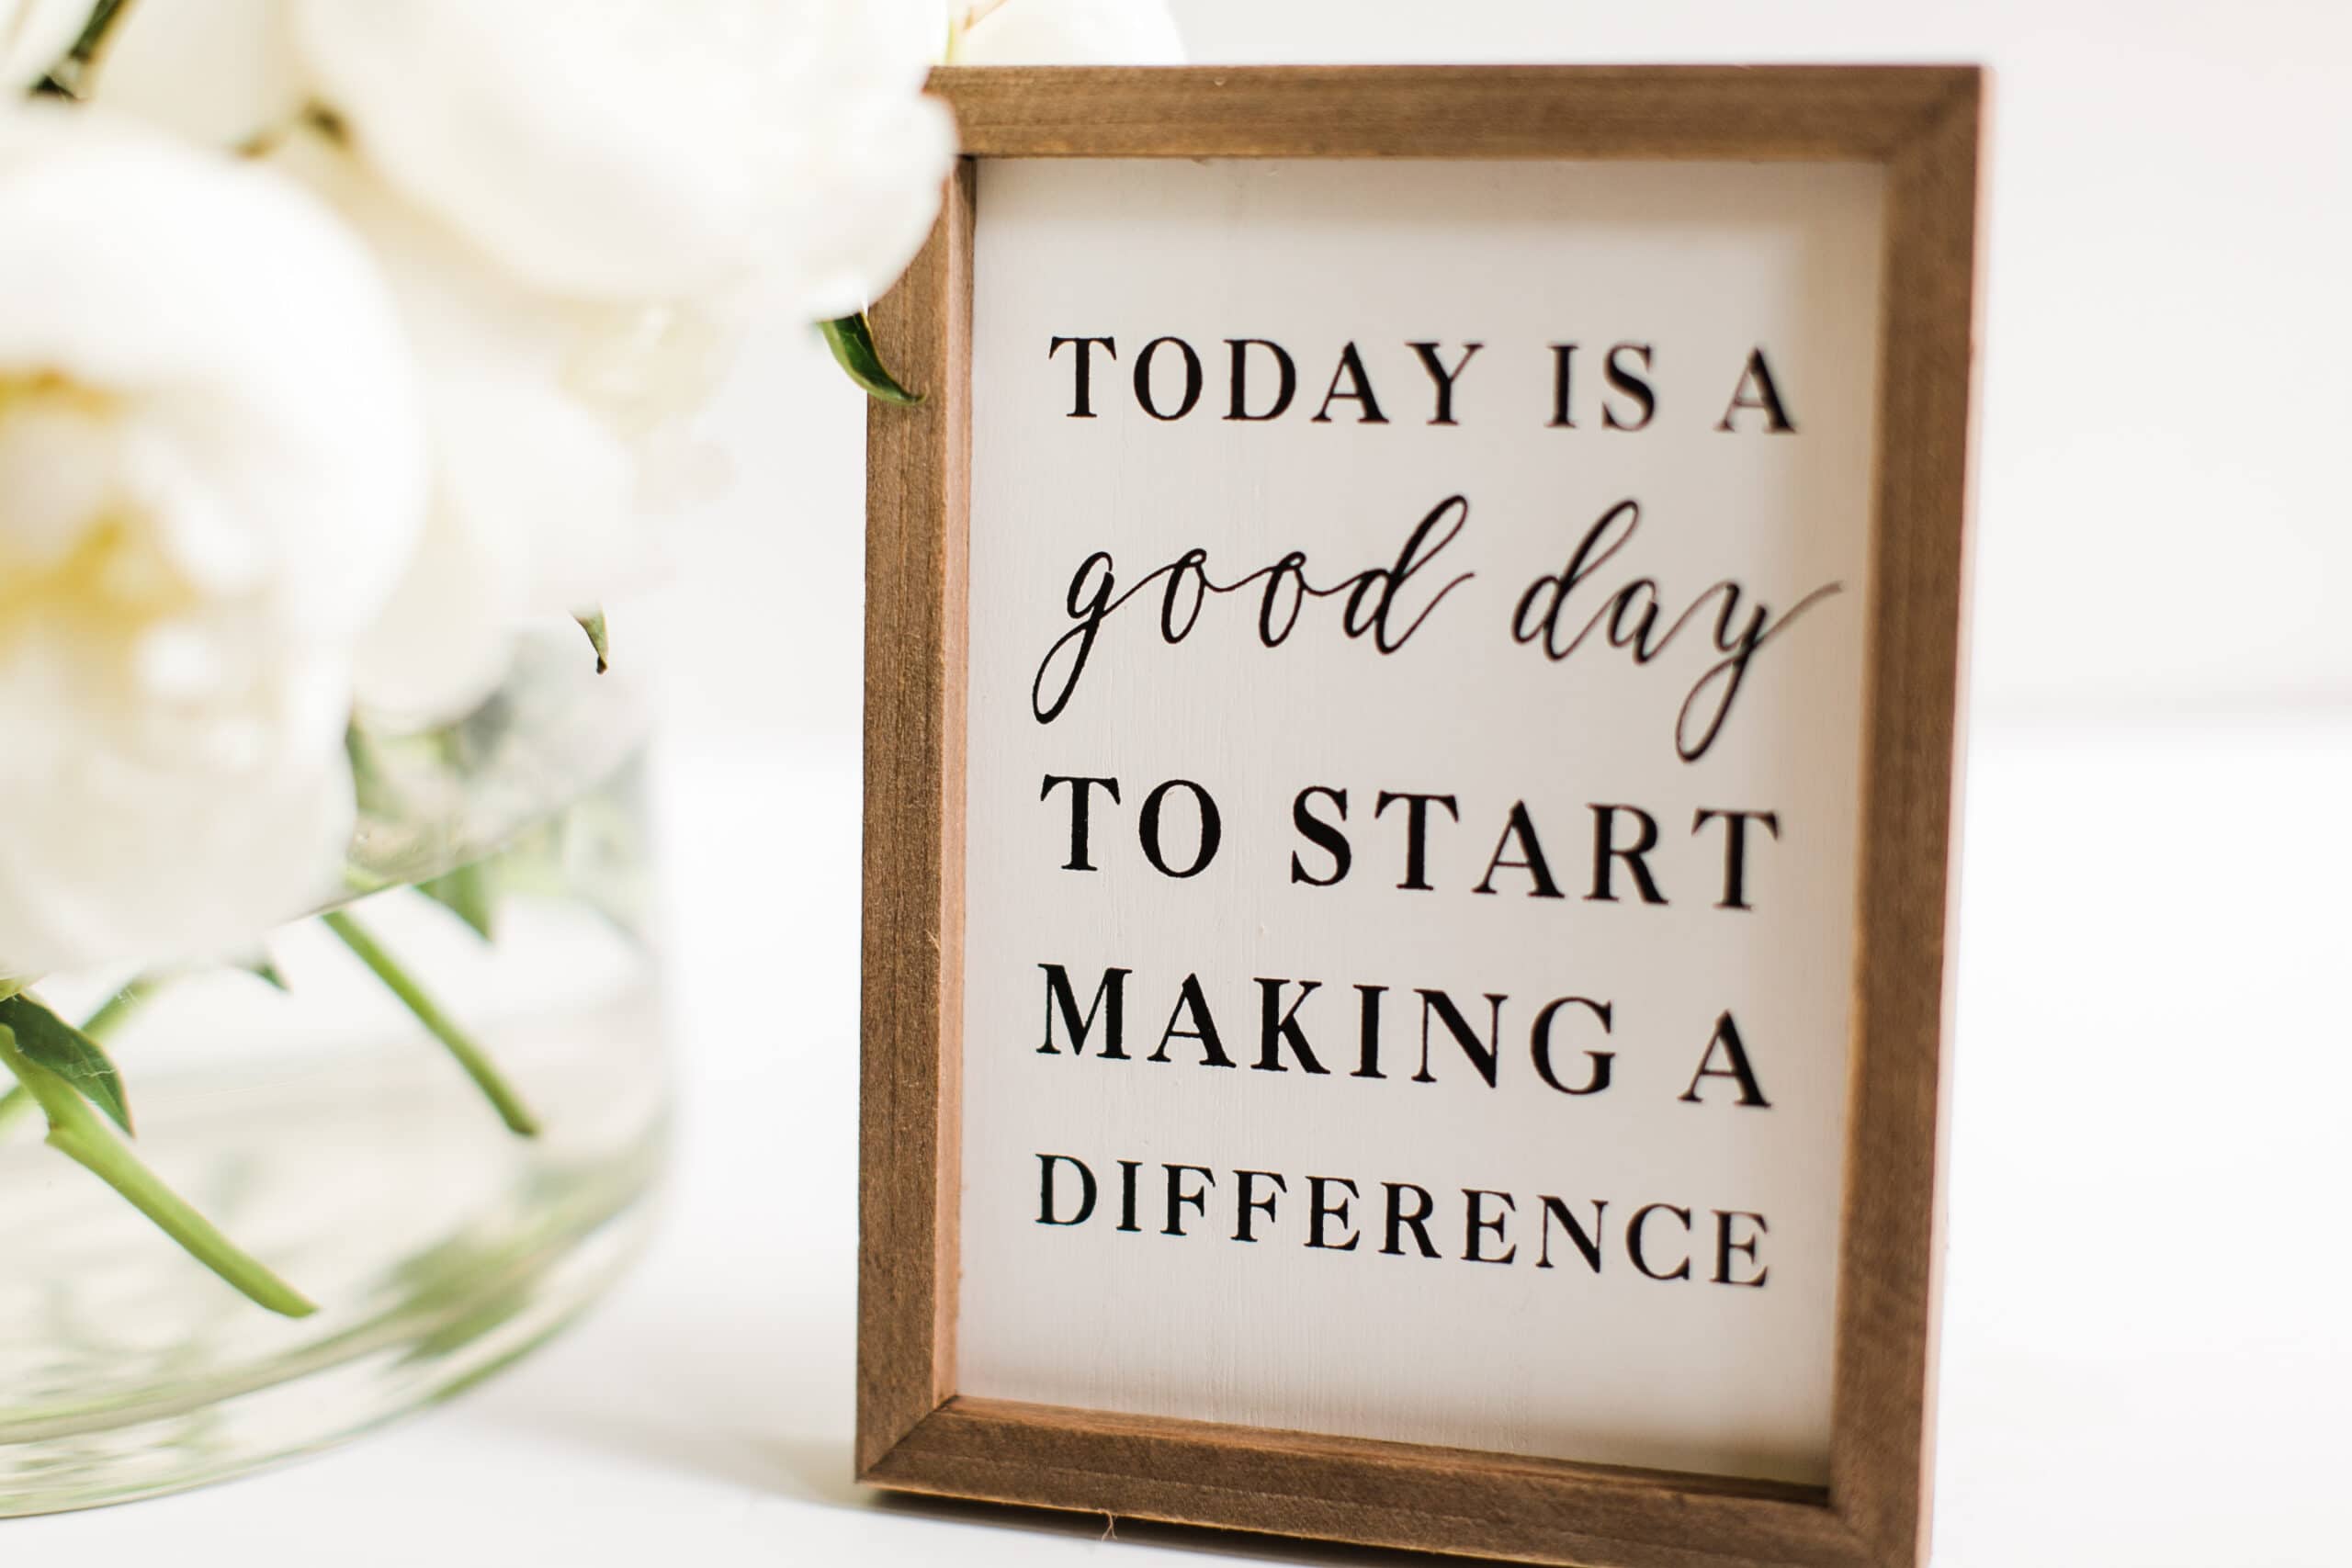 Inspirational quote in a wooden frame: "Today is a good day to start making a difference – embrace a new perspective on menopause.